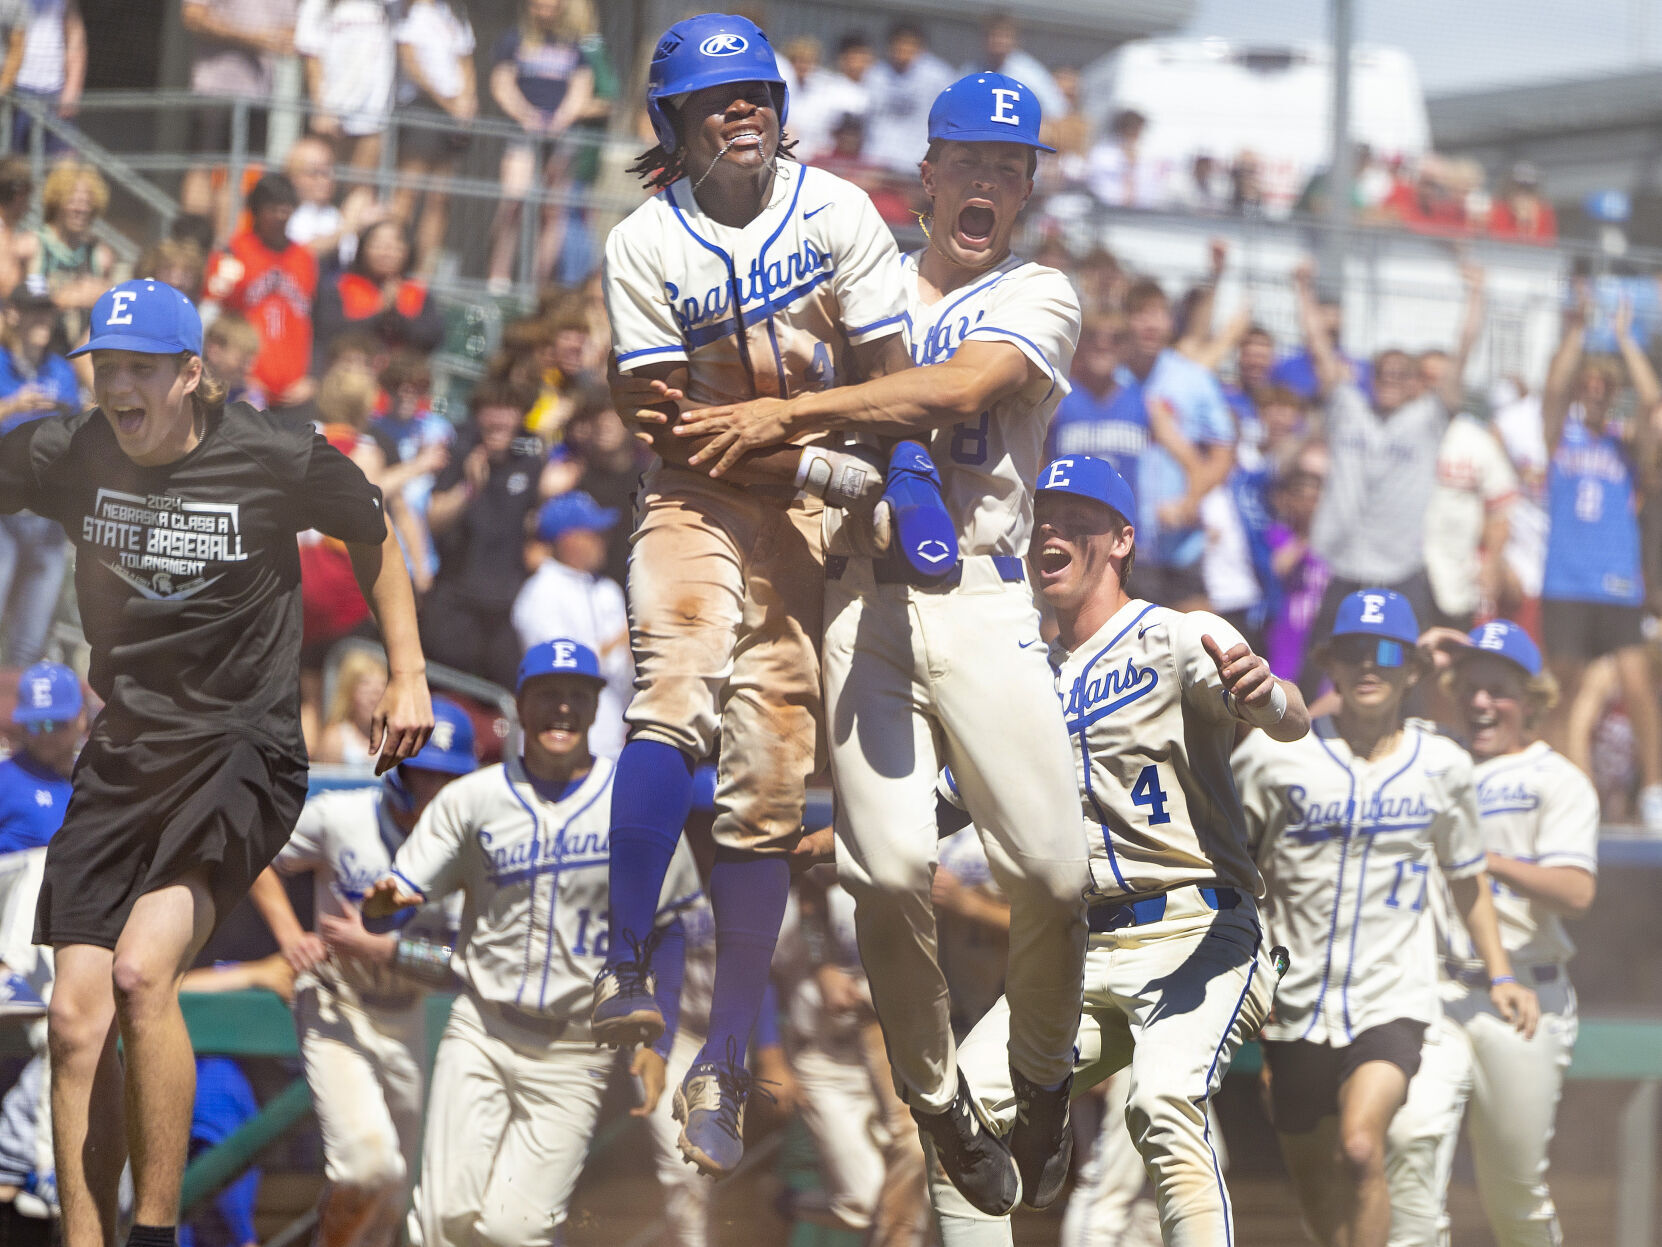 Lincoln East Secures Victory in Intense Class A State Baseball Matchup